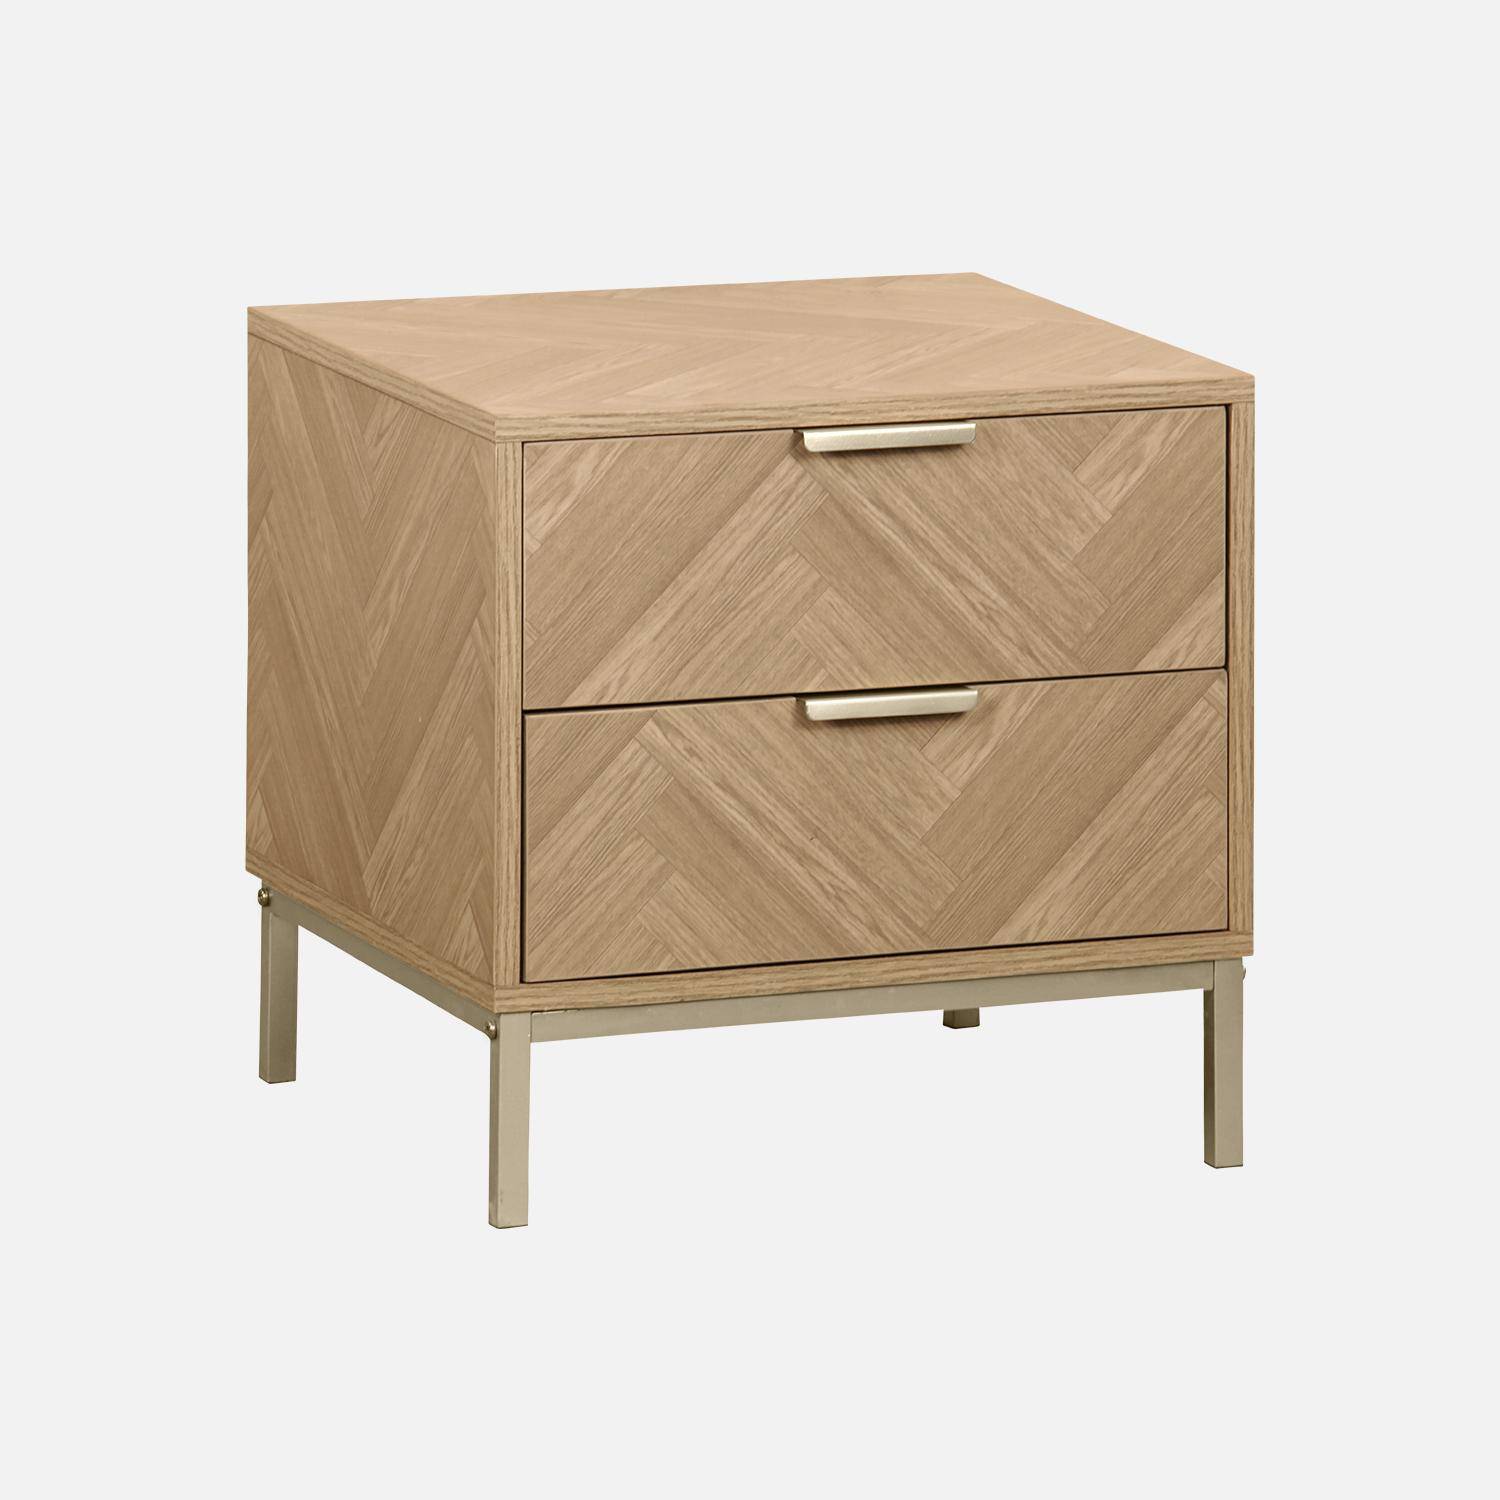 Herringbone bedside table with 2 drawers, 45x40x45cm - Budapest - Natural Photo3